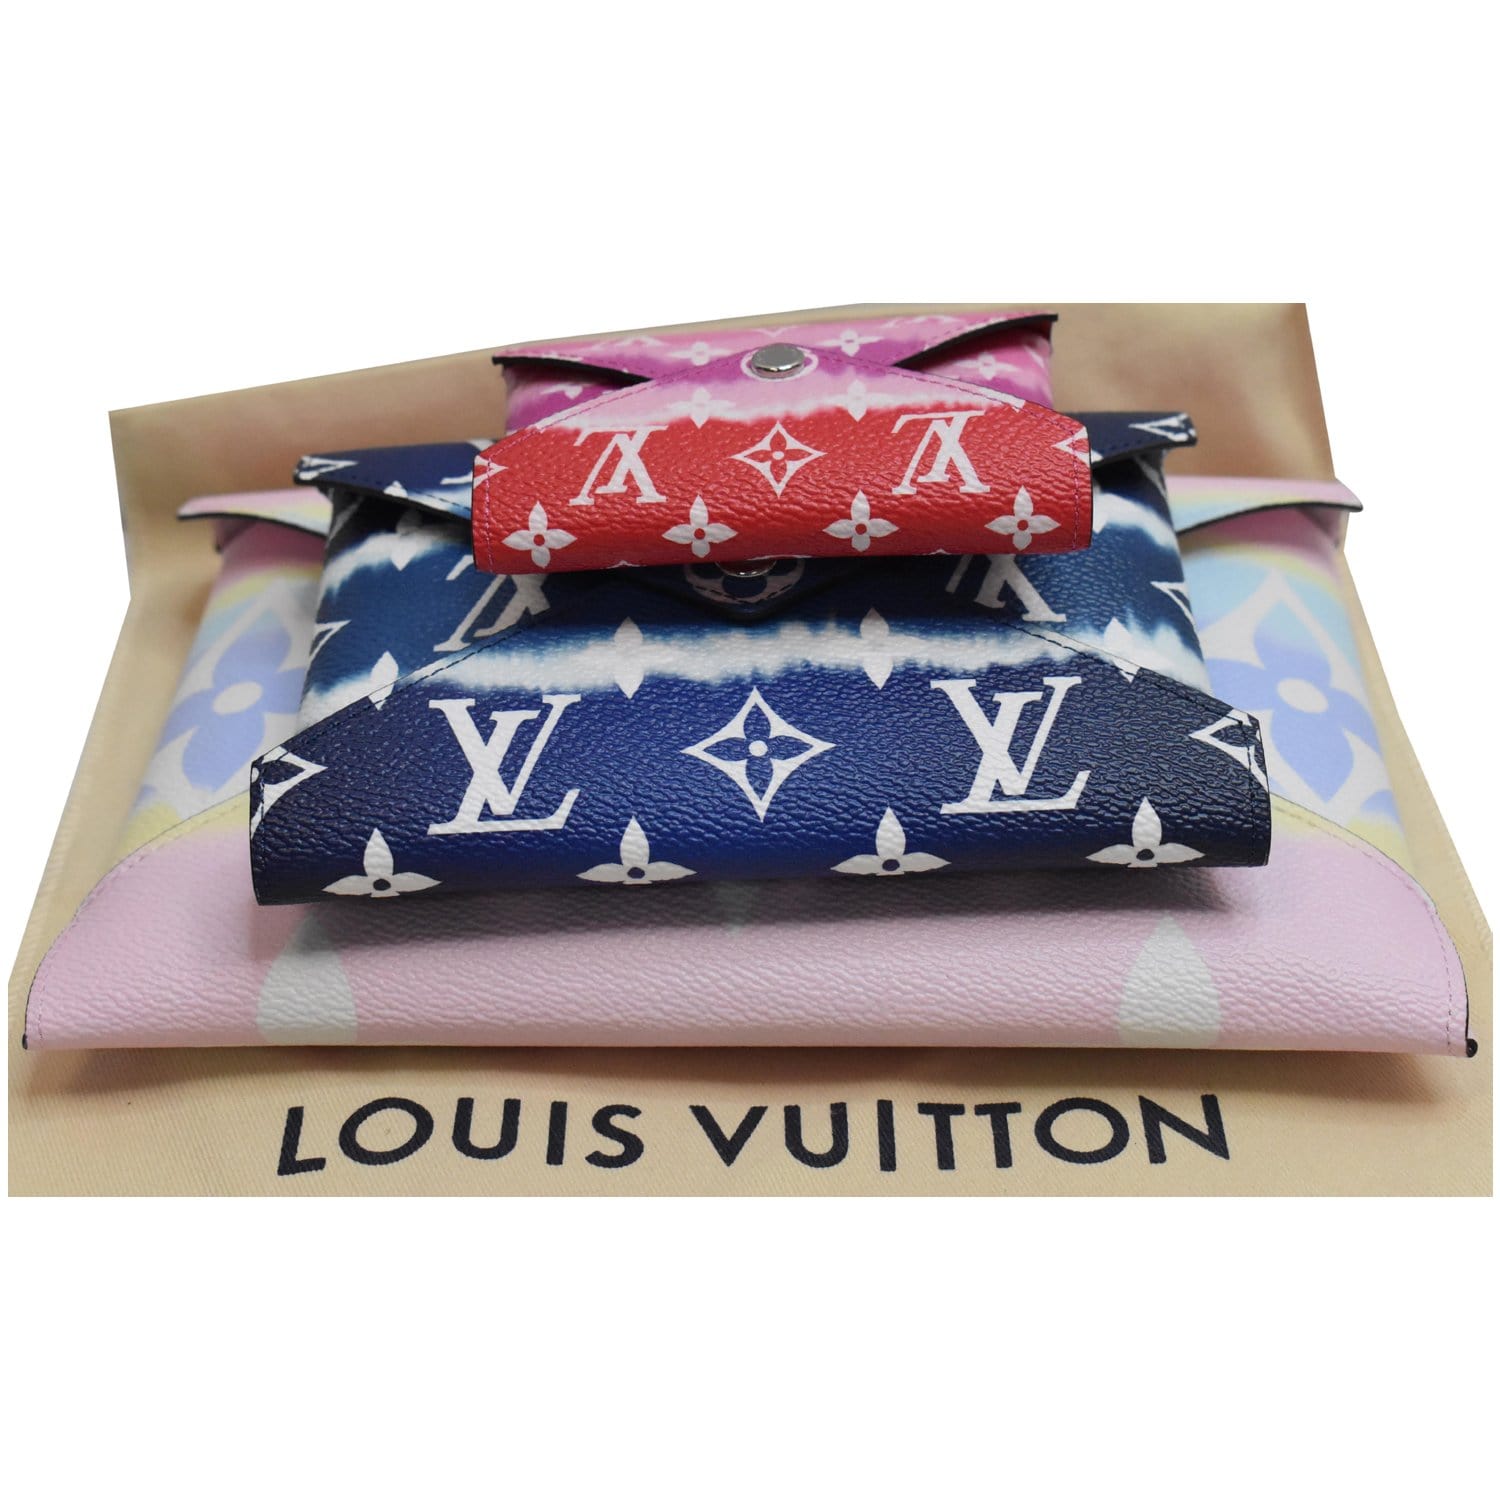 Louis Vuitton, Bags, Soldddd Auth Lv Pochette Kirigami Med Size Red